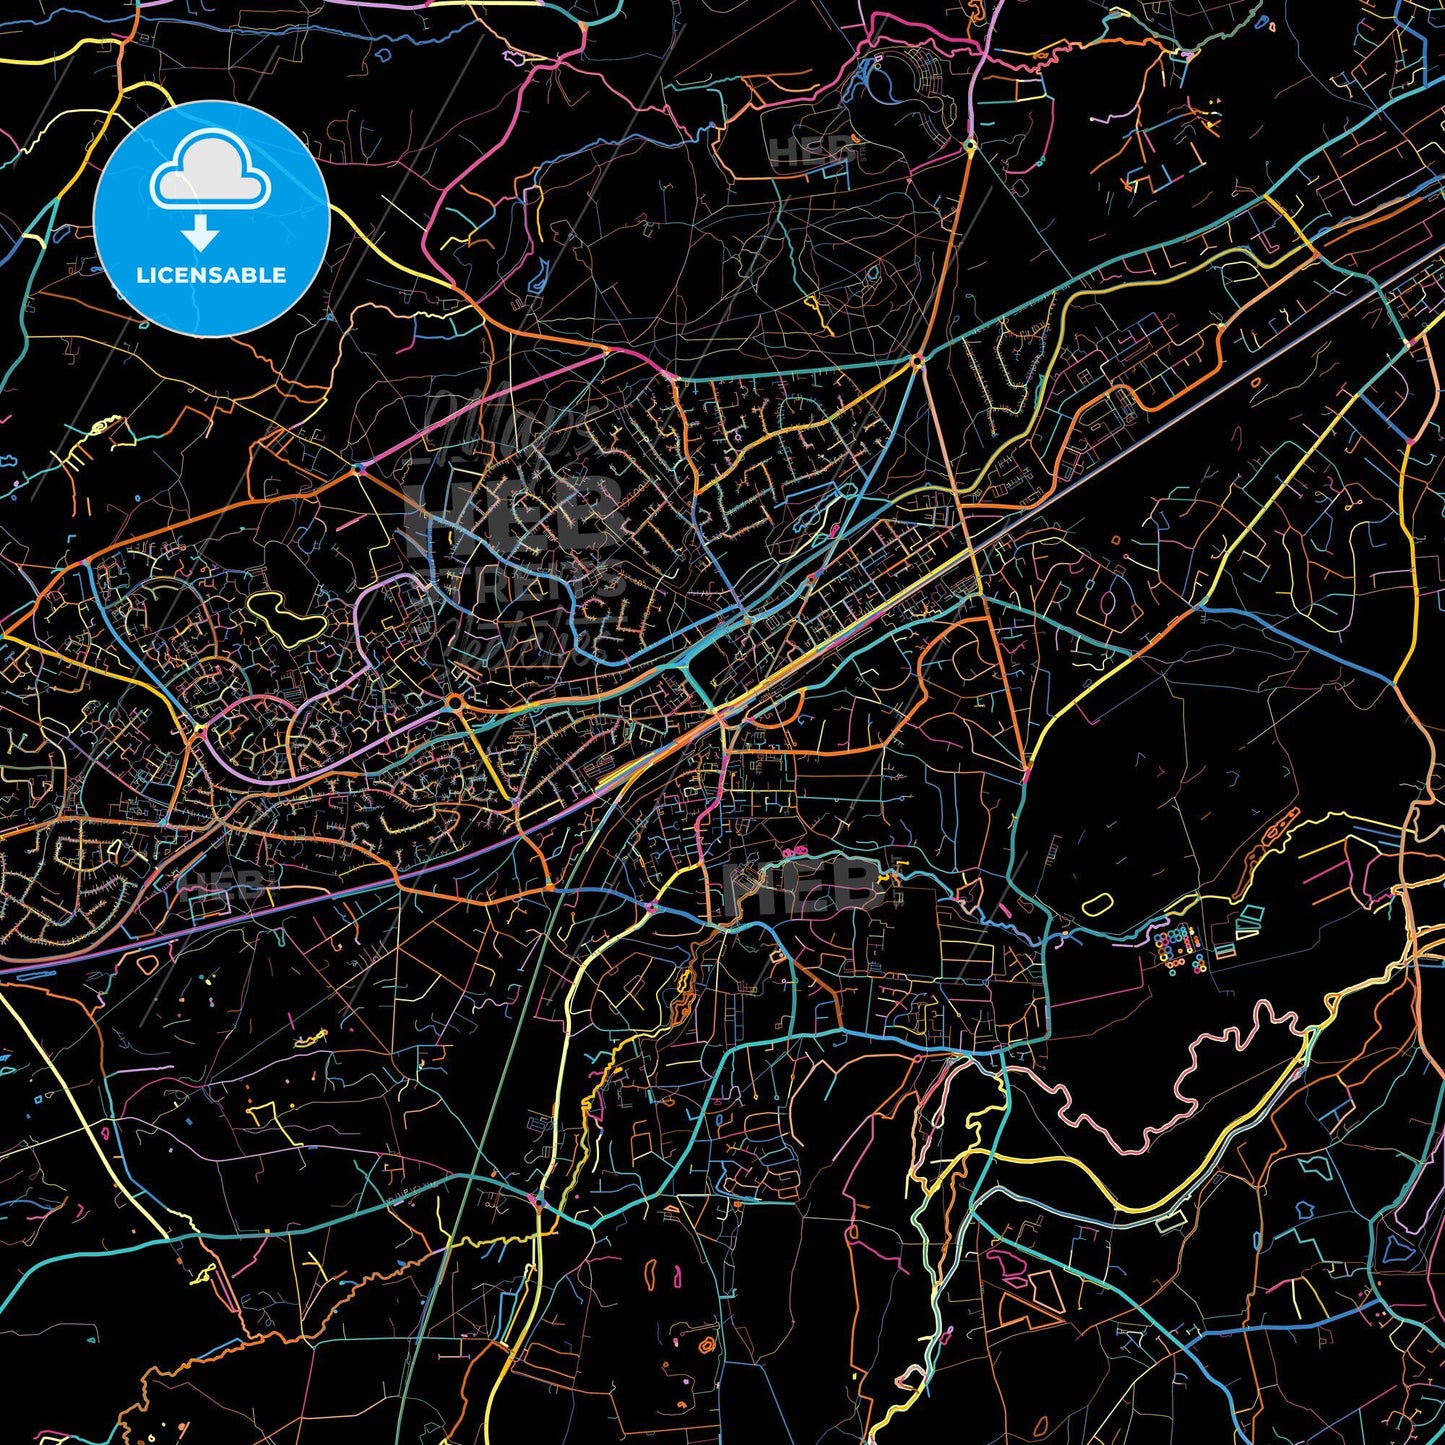 Woking, South East England, England, colorful city map on black background